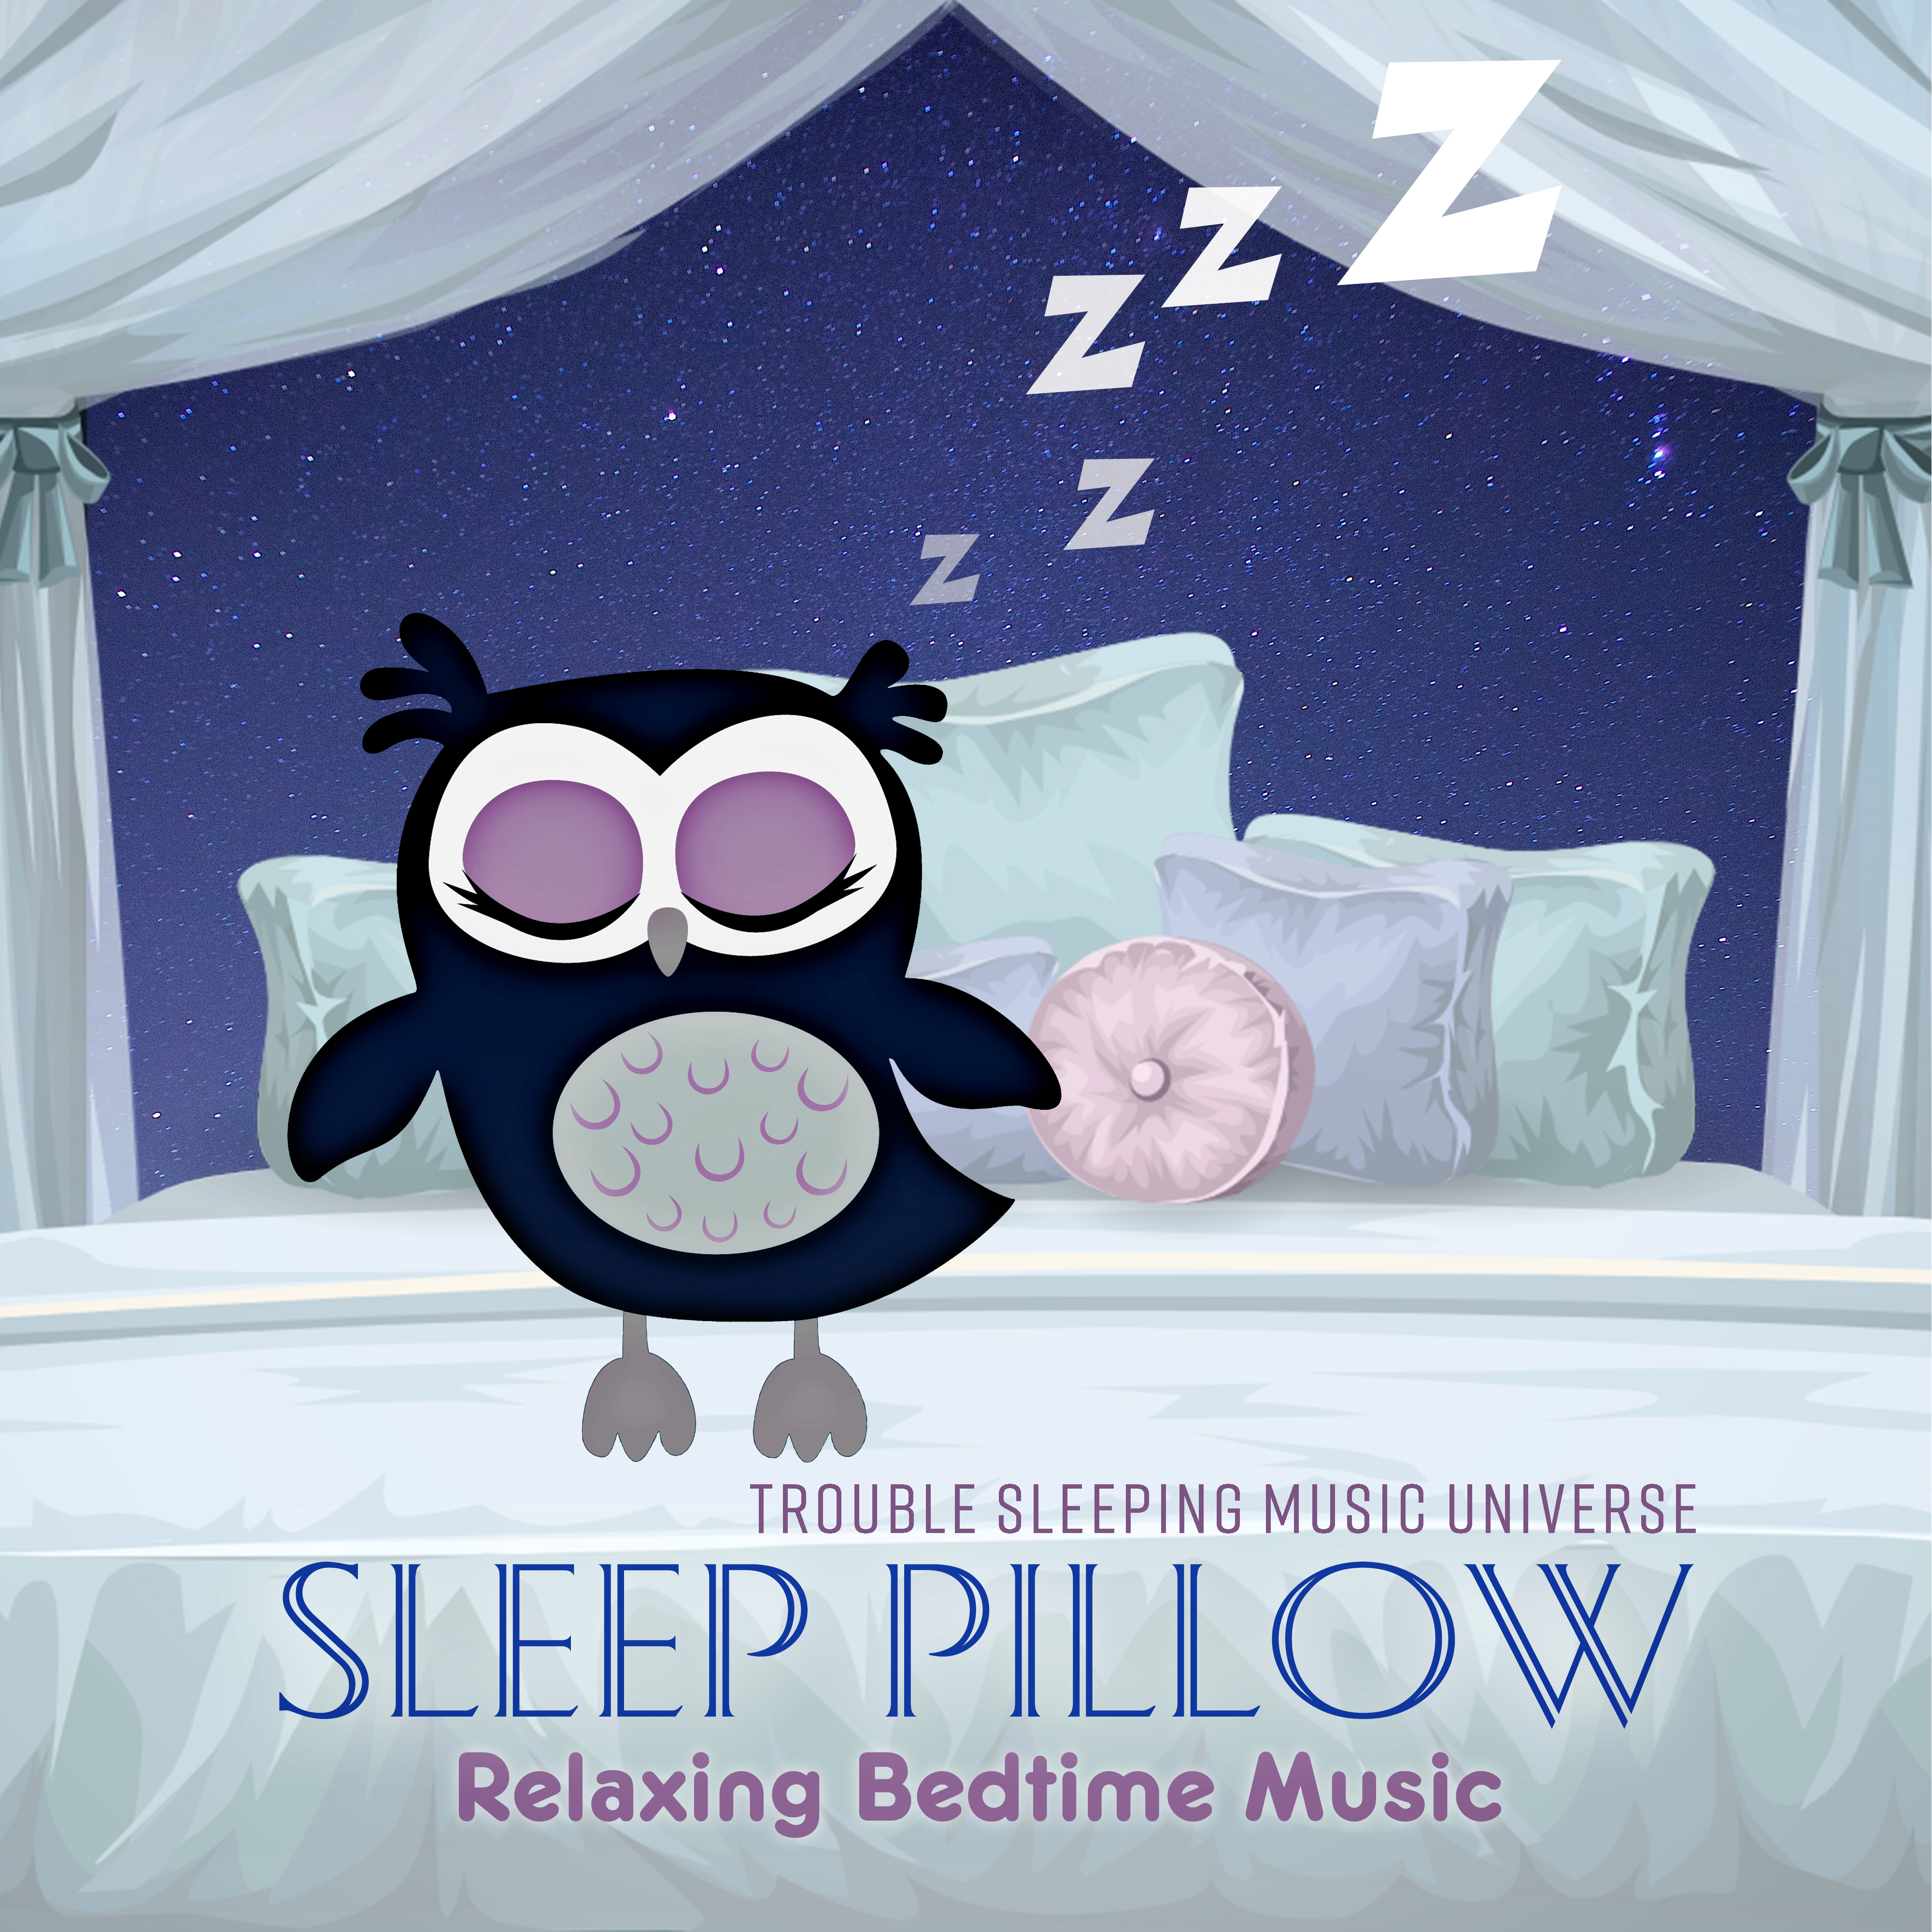 Sleep Pillow  Relaxing, Soothing and Peaceful Music to Help You Fall Asleep Fast, Natural Sounds for Sleep Remedy